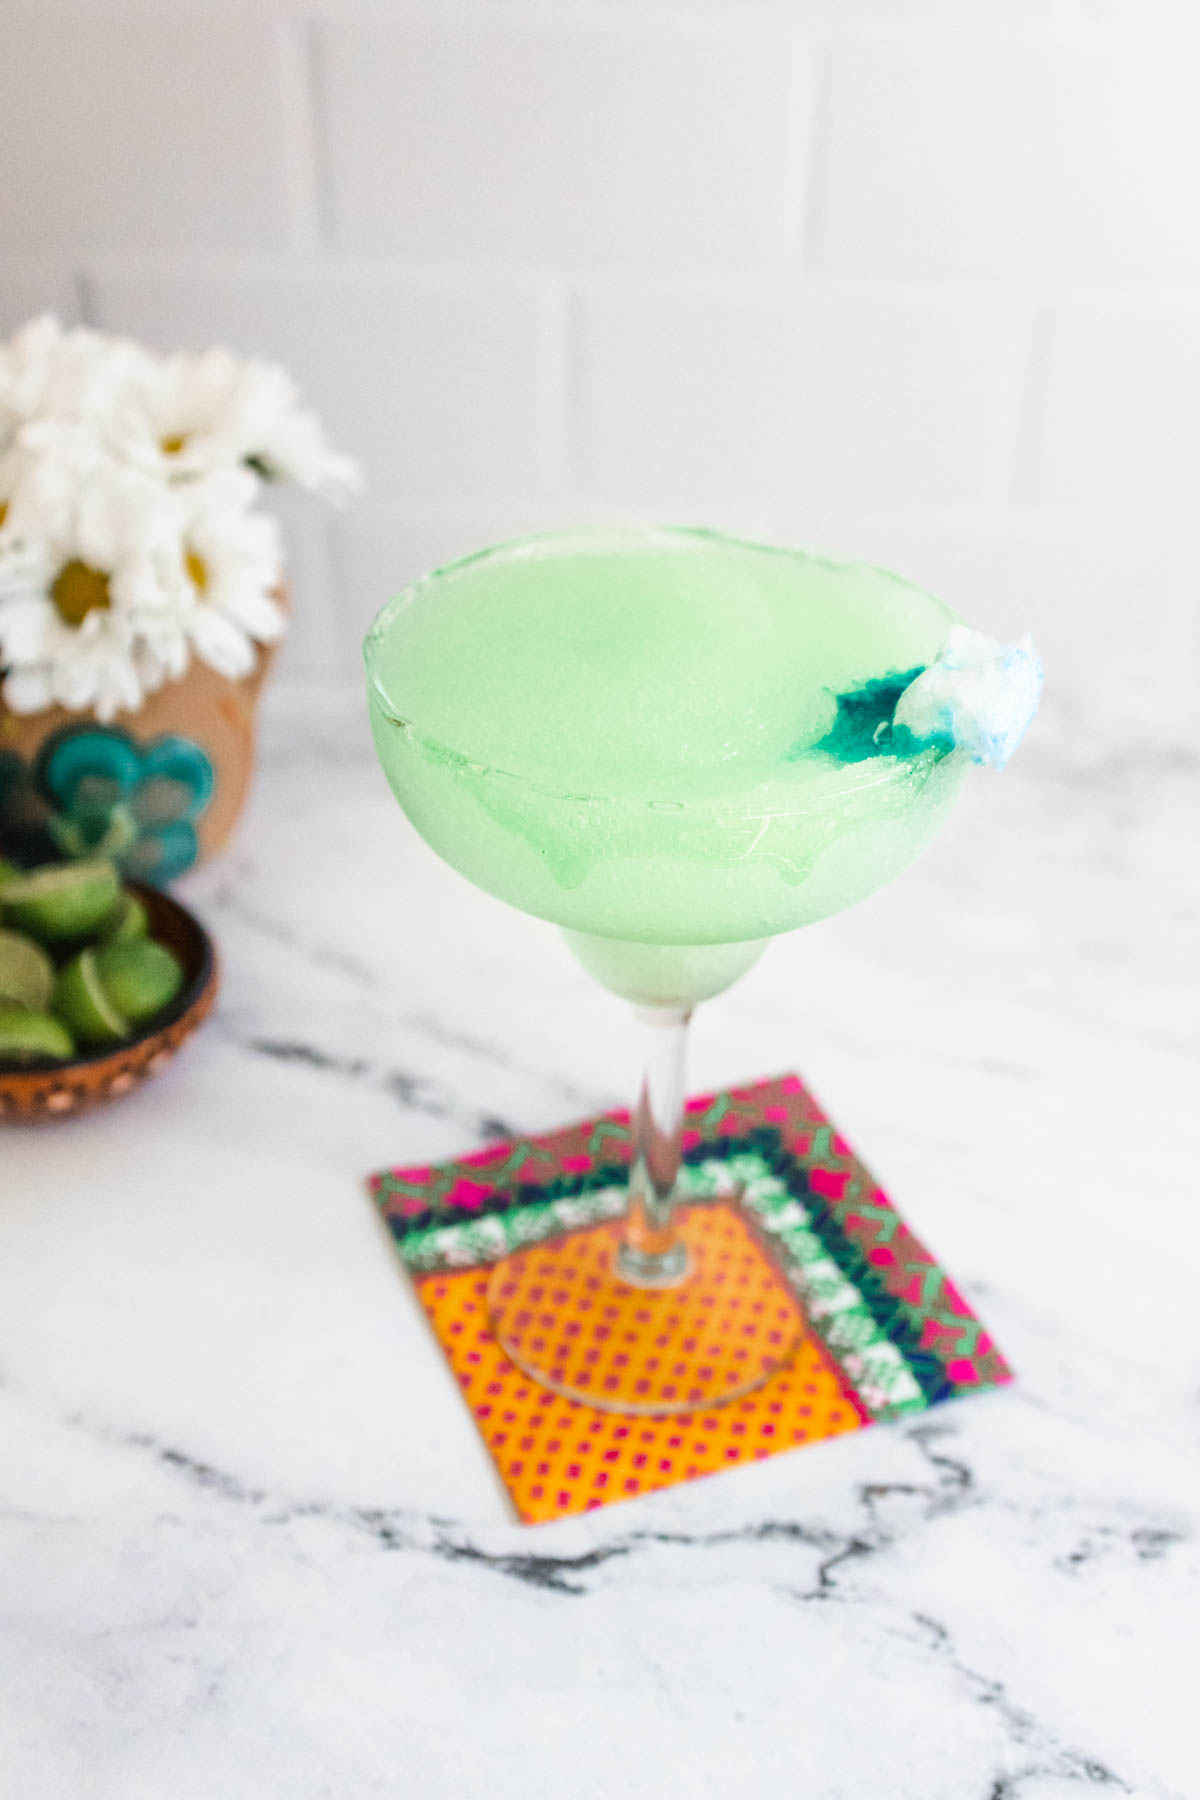 A margarita glass on a table holding a green frozen margarita inspired by the new Ghostbusters movie with a blue melting garnish.